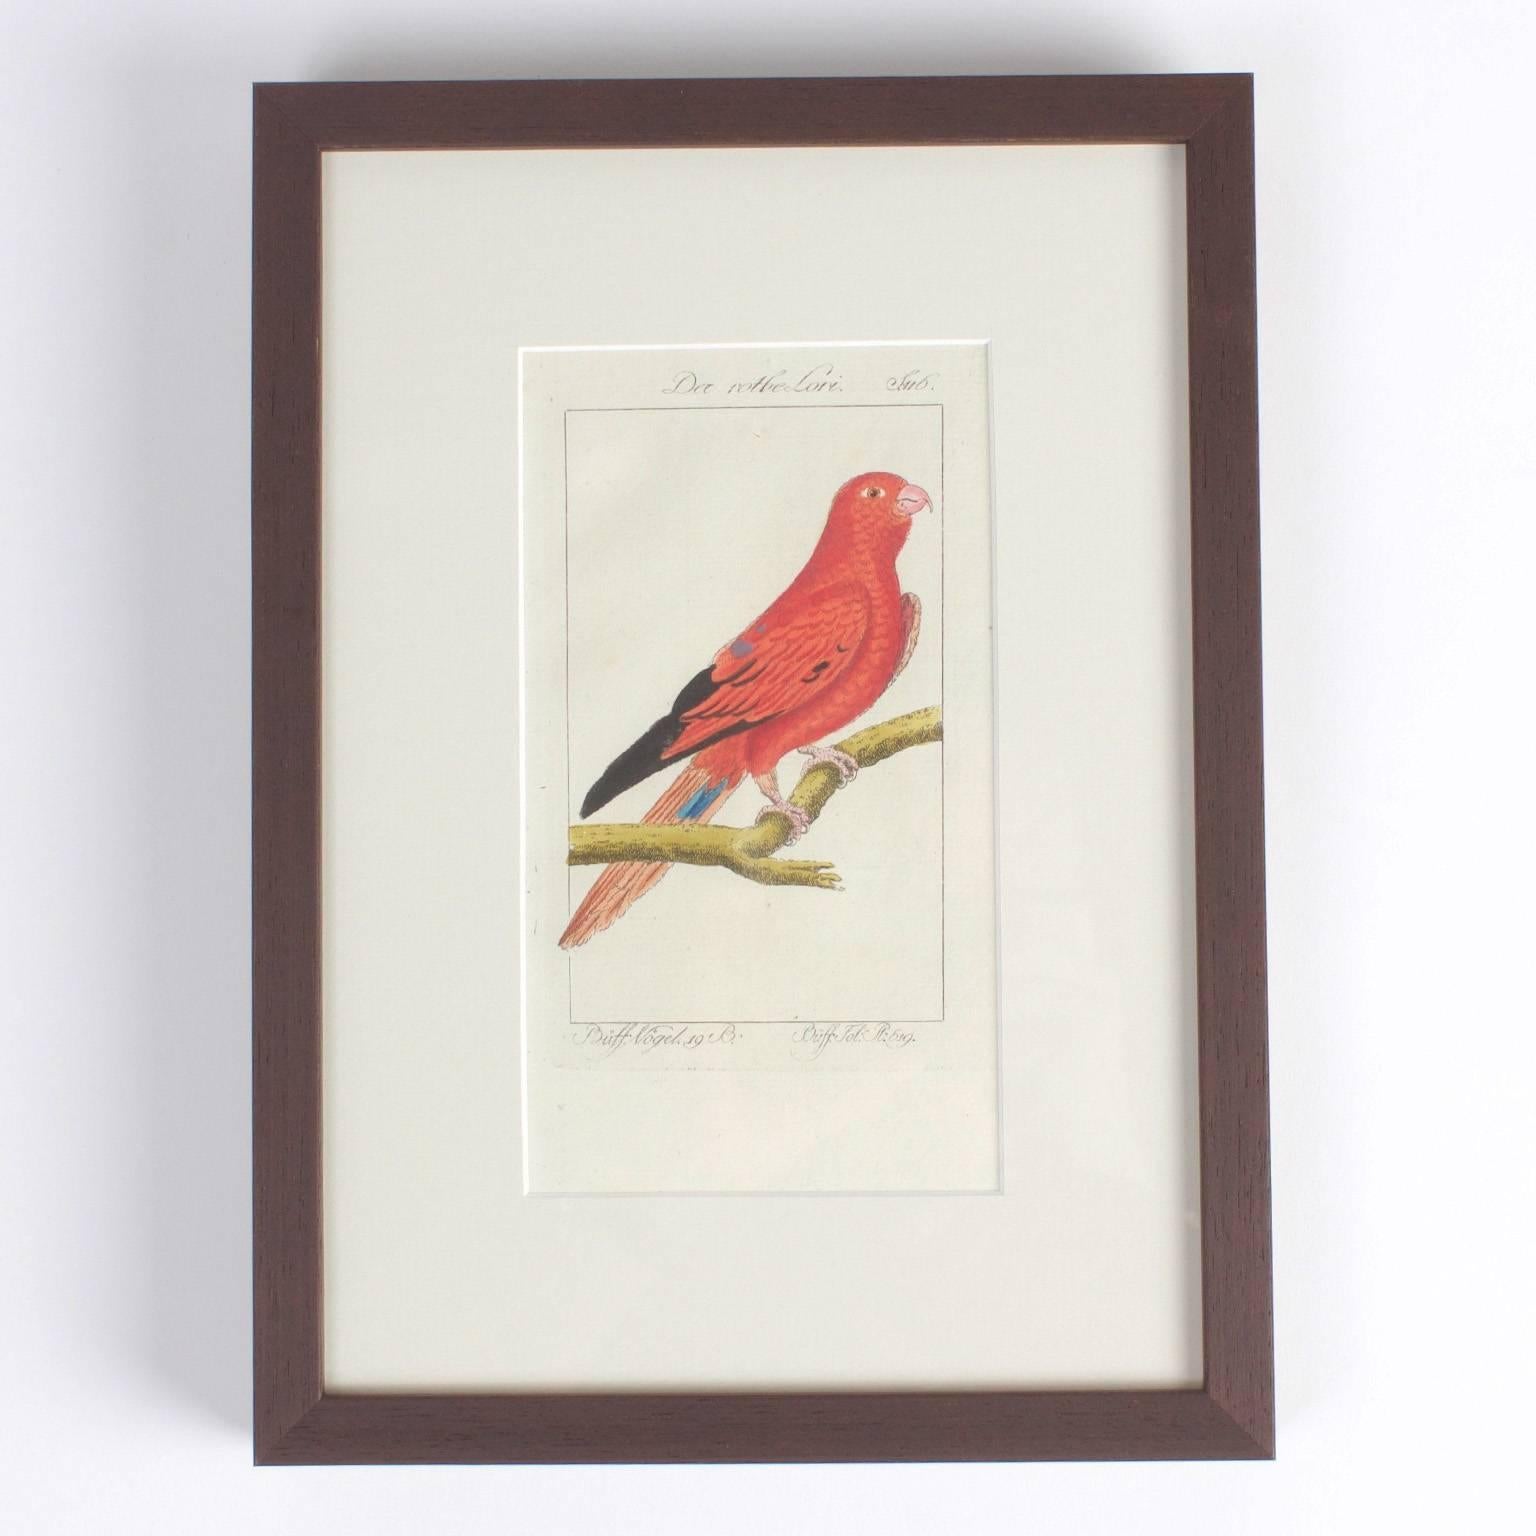 Charming and historical set of four hand-colored bird engravings rescued from a catalog of naturalist's studies. Signed on the bottom by the engraver and the watercolorist.